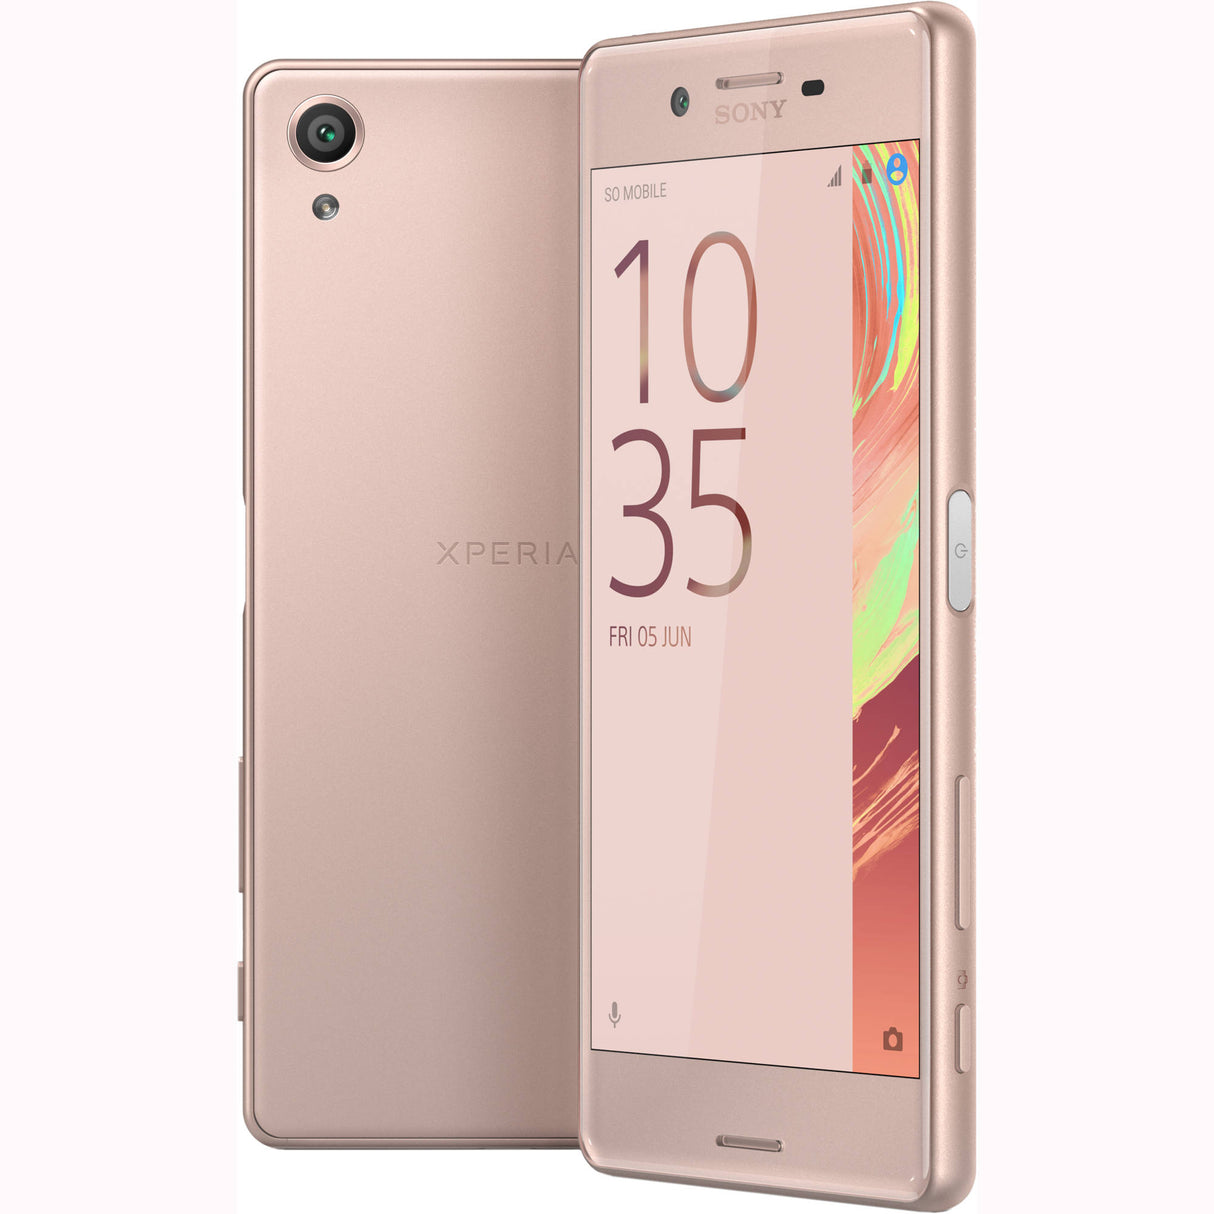 Sony Xperia X - 32 GB - Rose Gold - Unlocked - GSM